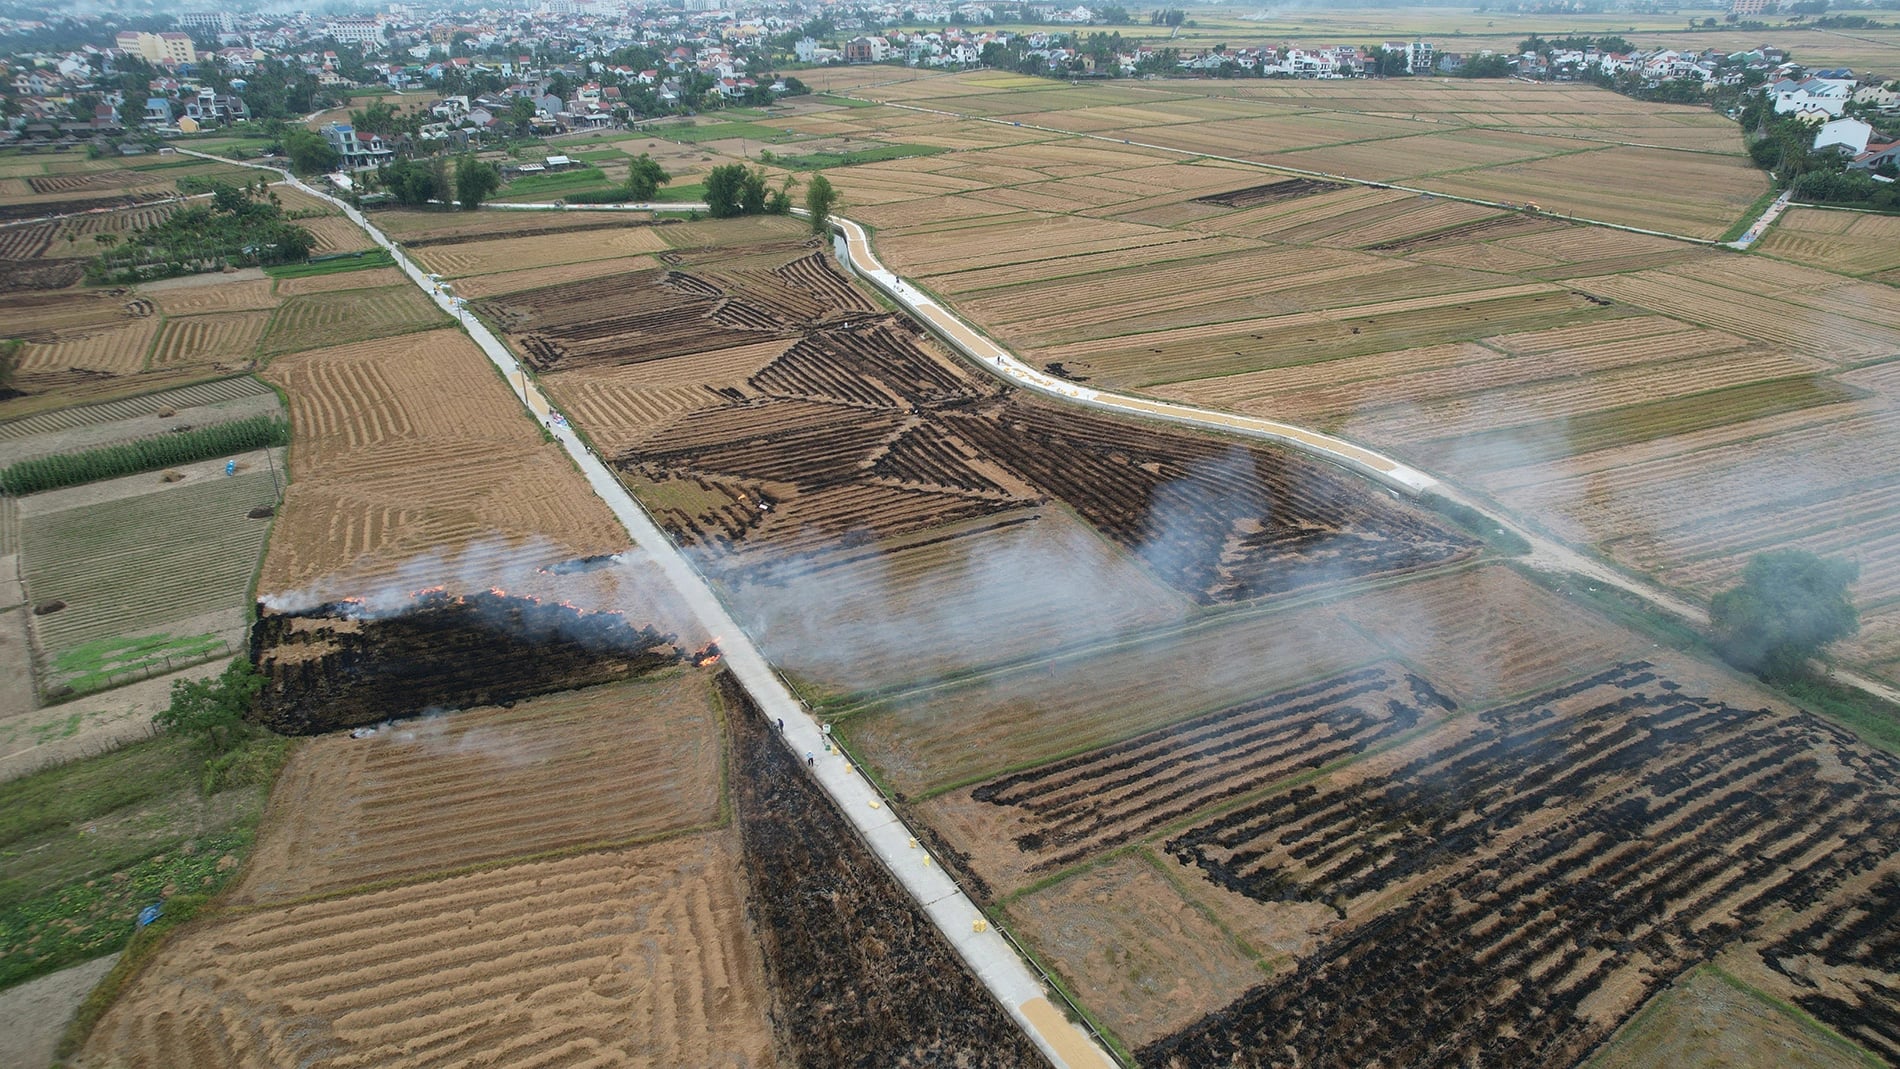 Farmers burn rice straw on harvested fields, a method to destroy disease germs and weeds as well as to use ash as fertilizer for the soil, in Hoi An City, central Vietnam. Photo: Pham Van Son